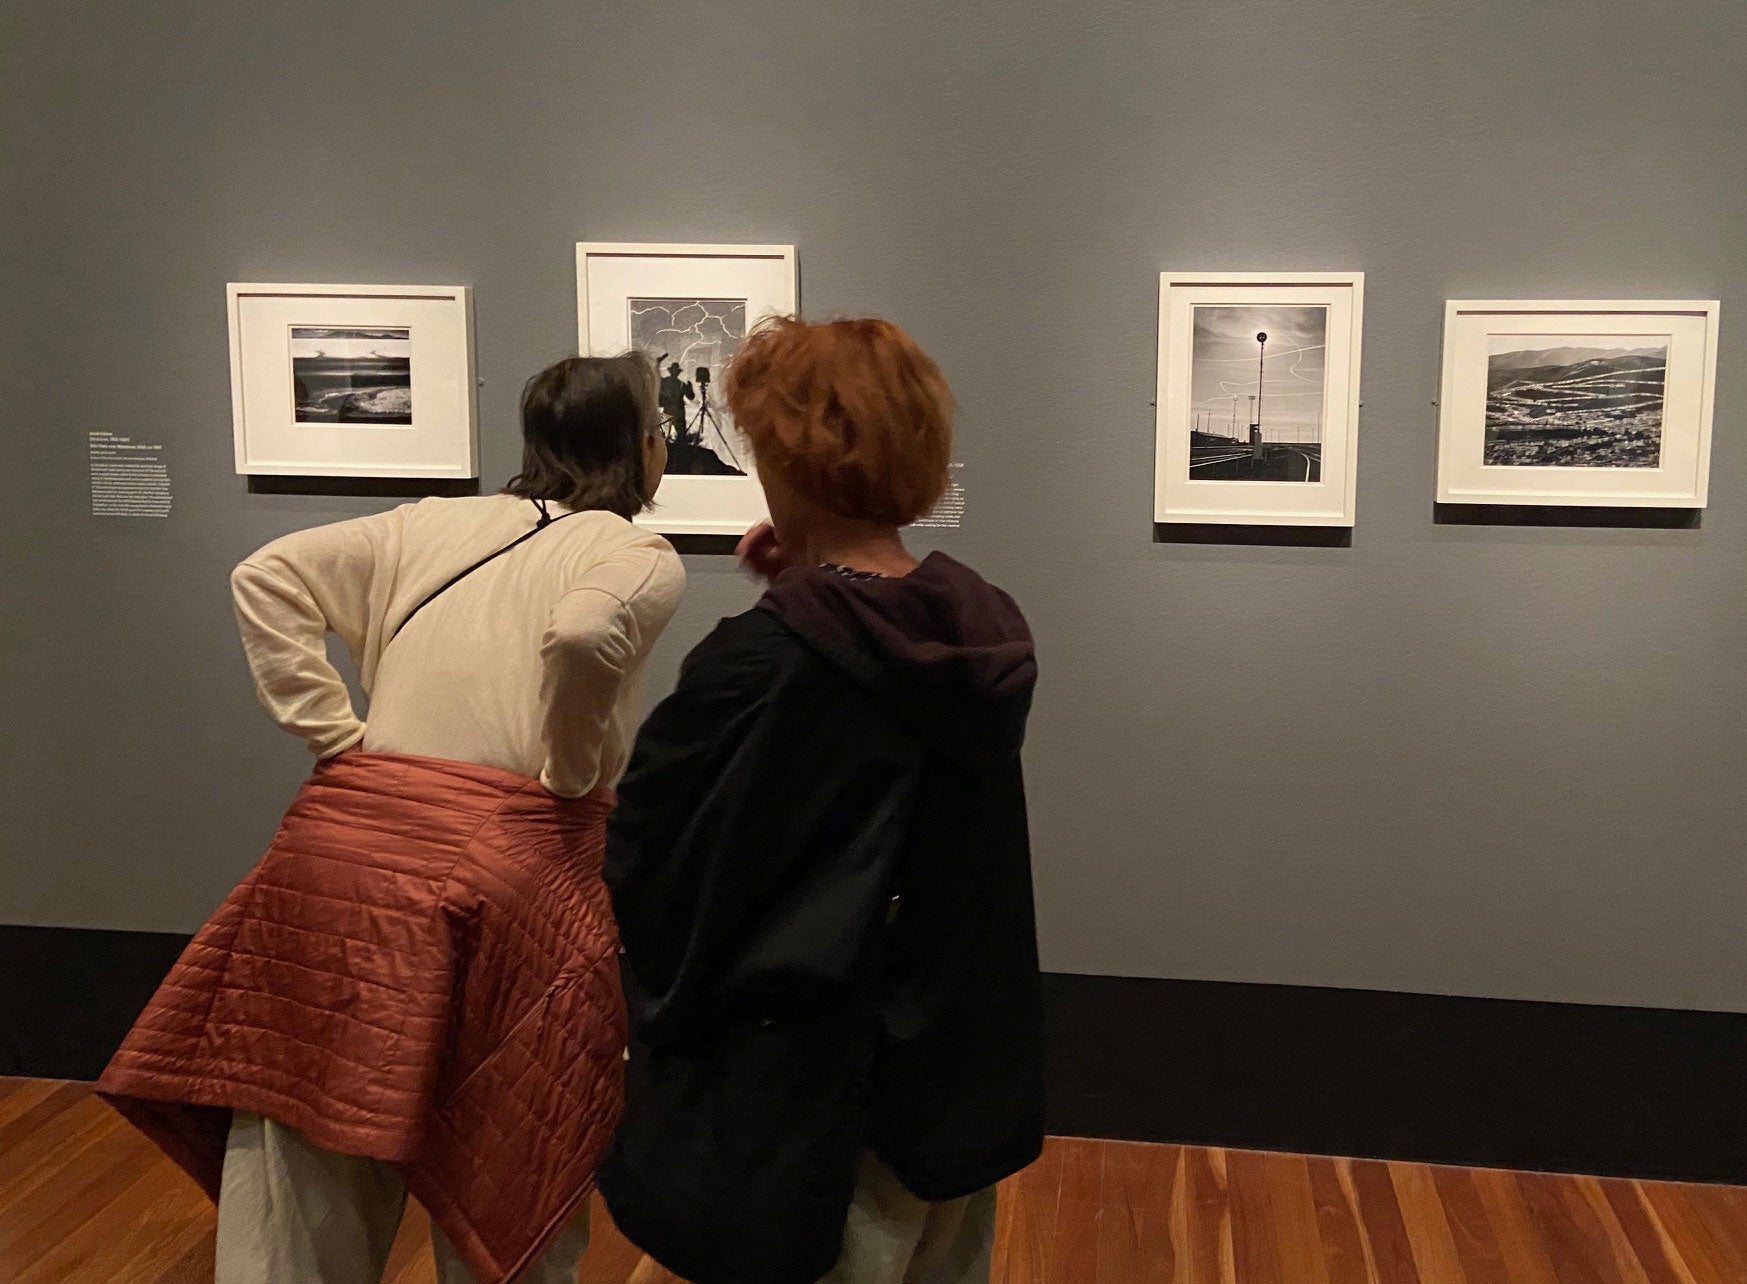 Art viewers look closely at black-and-white photographs in frames on gray wall in museum